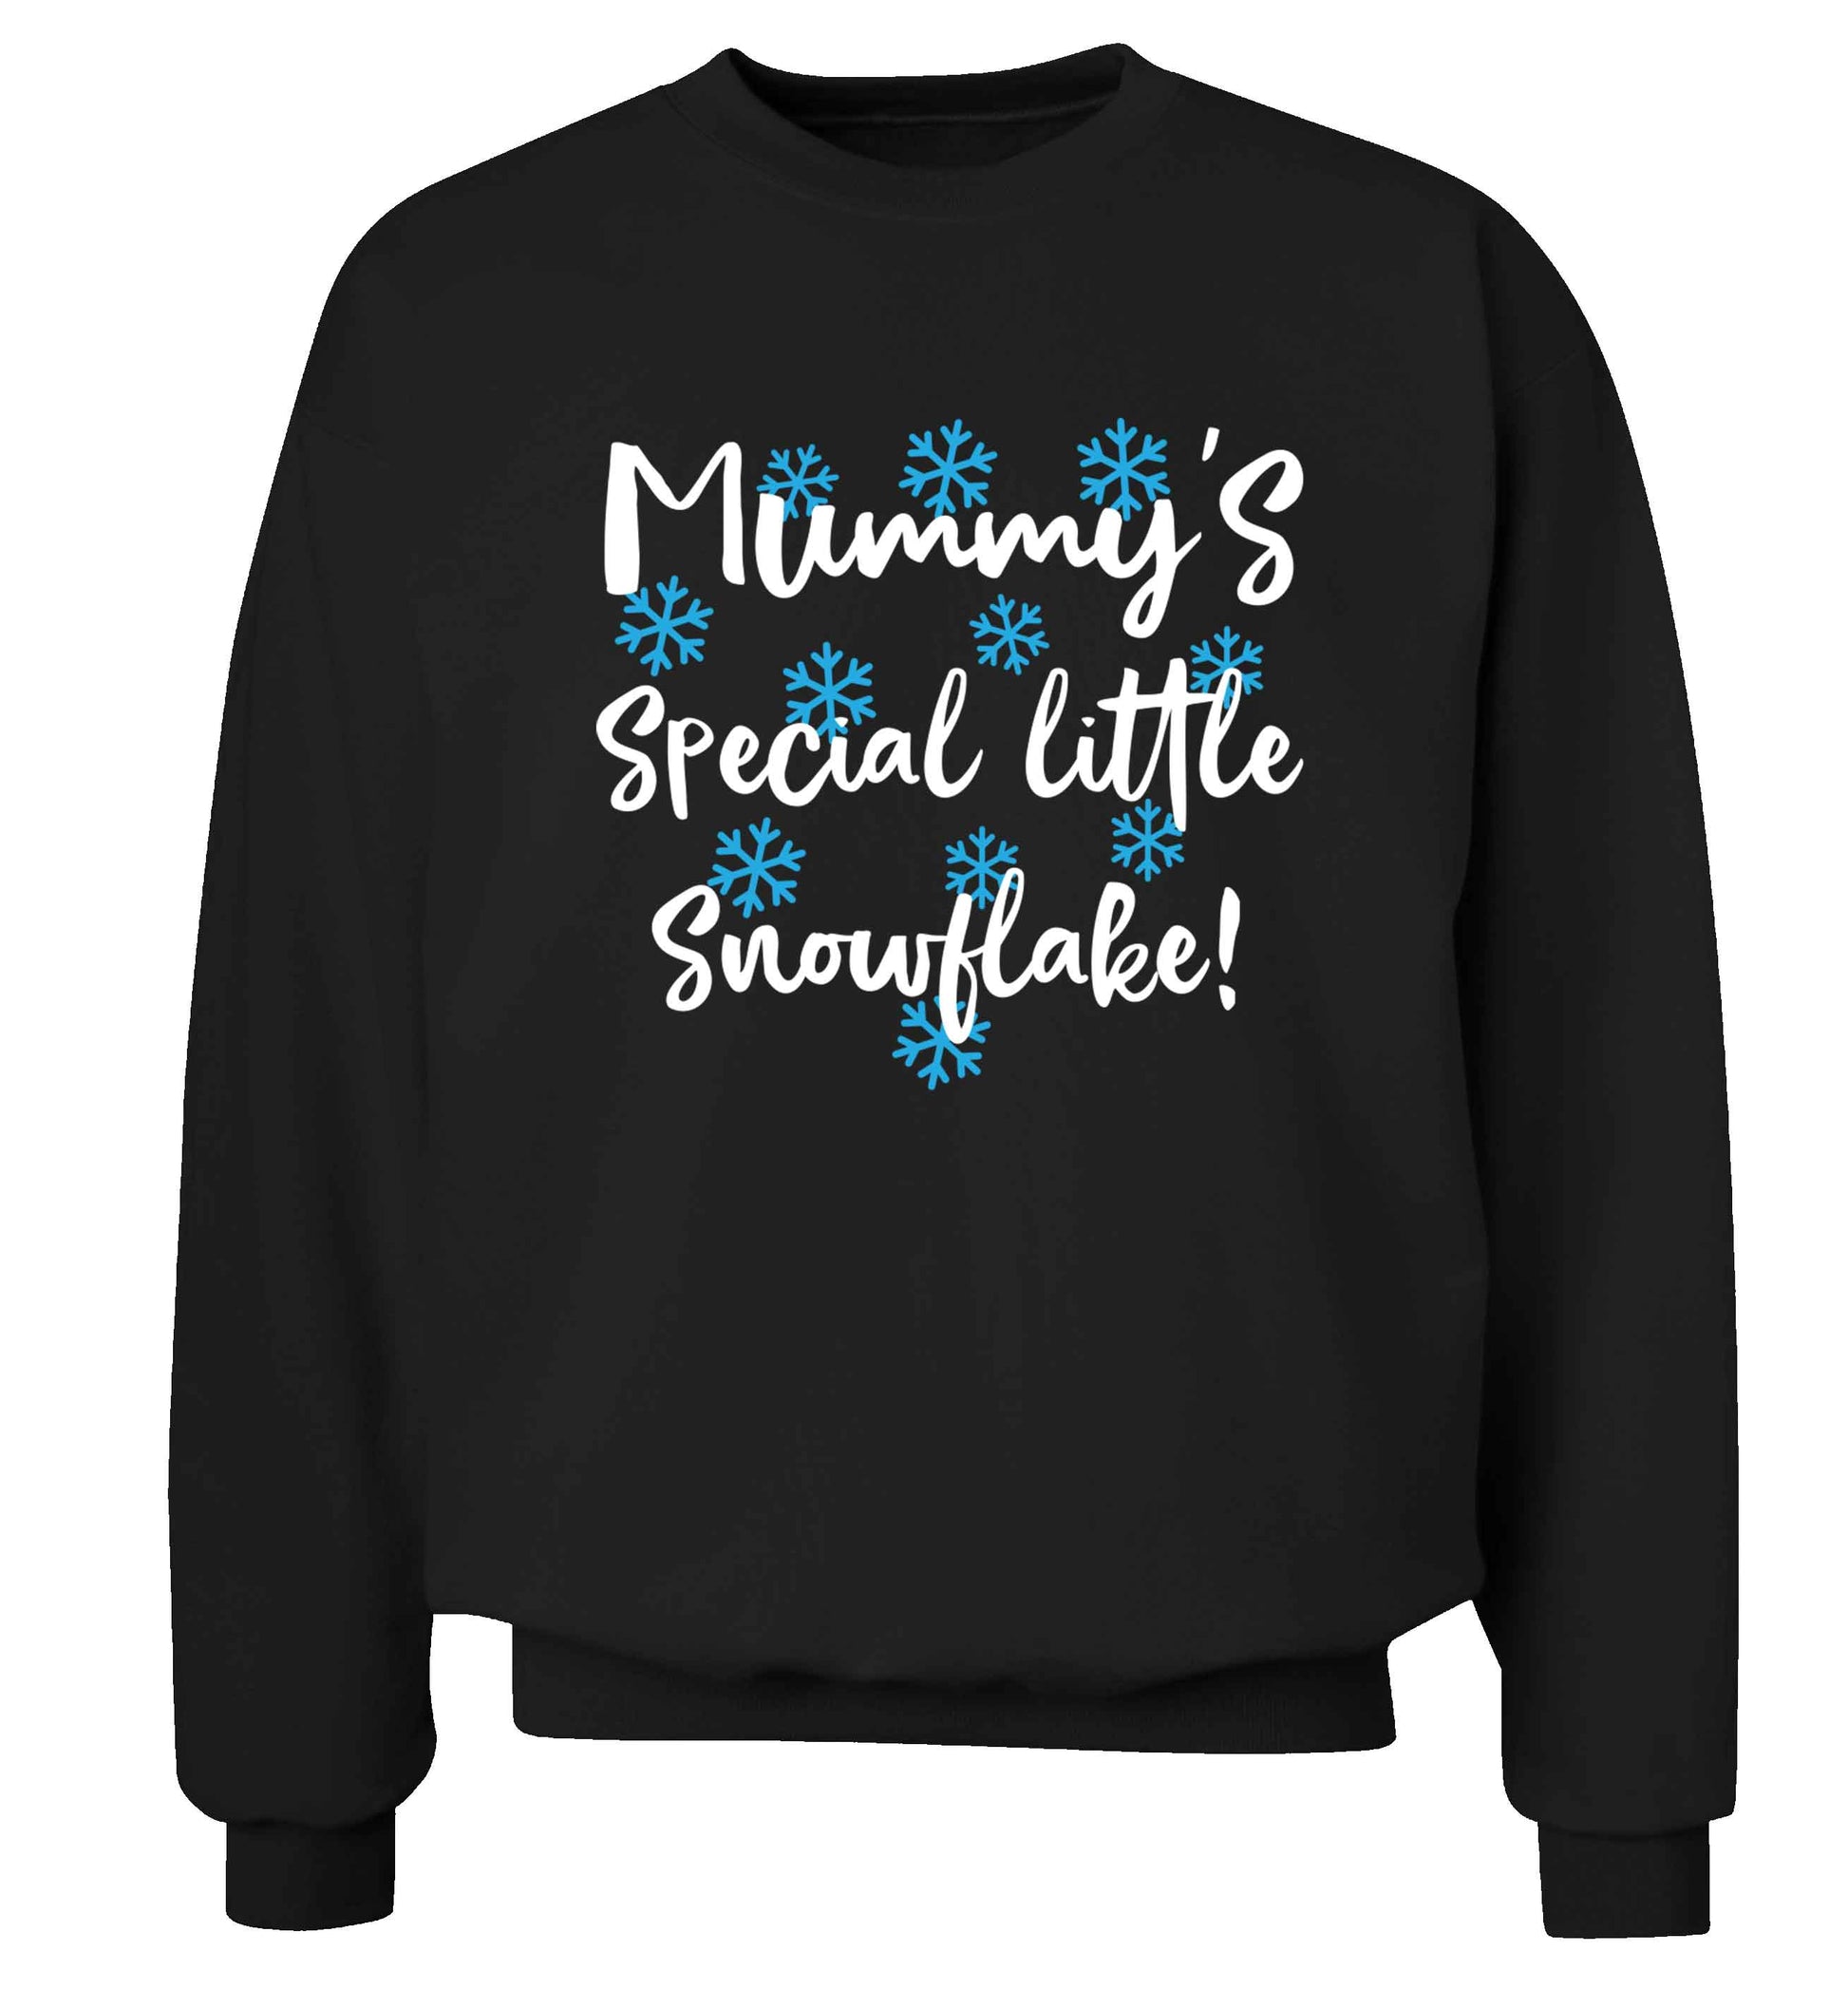 Mummy's special little snowflake Adult's unisex black Sweater 2XL